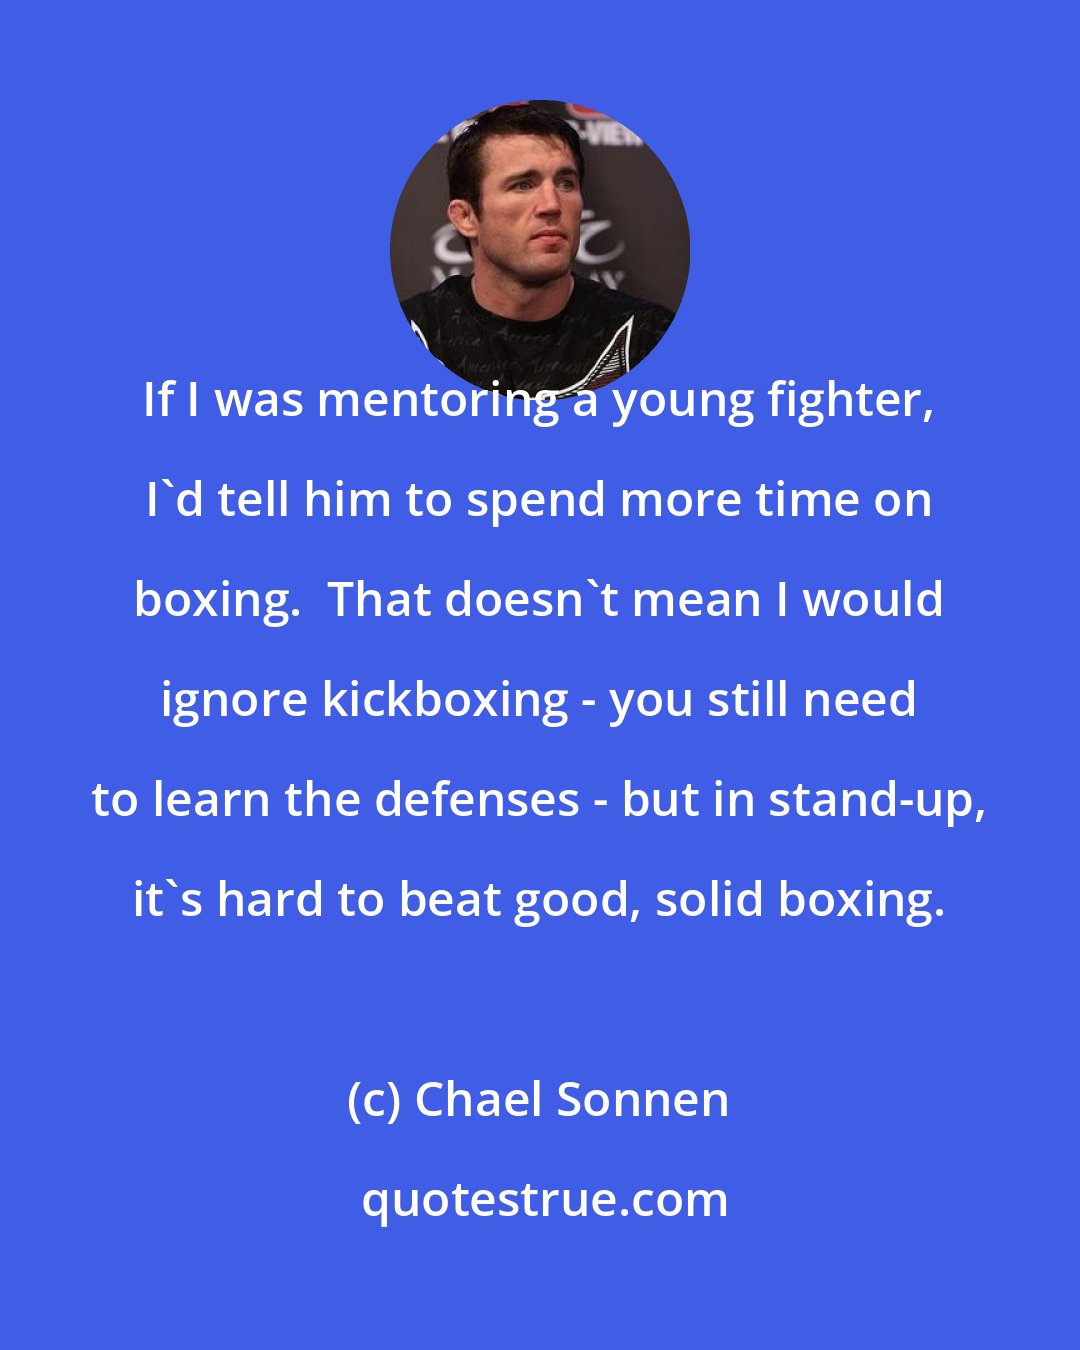 Chael Sonnen: If I was mentoring a young fighter, I'd tell him to spend more time on boxing.  That doesn't mean I would ignore kickboxing - you still need to learn the defenses - but in stand-up, it's hard to beat good, solid boxing.